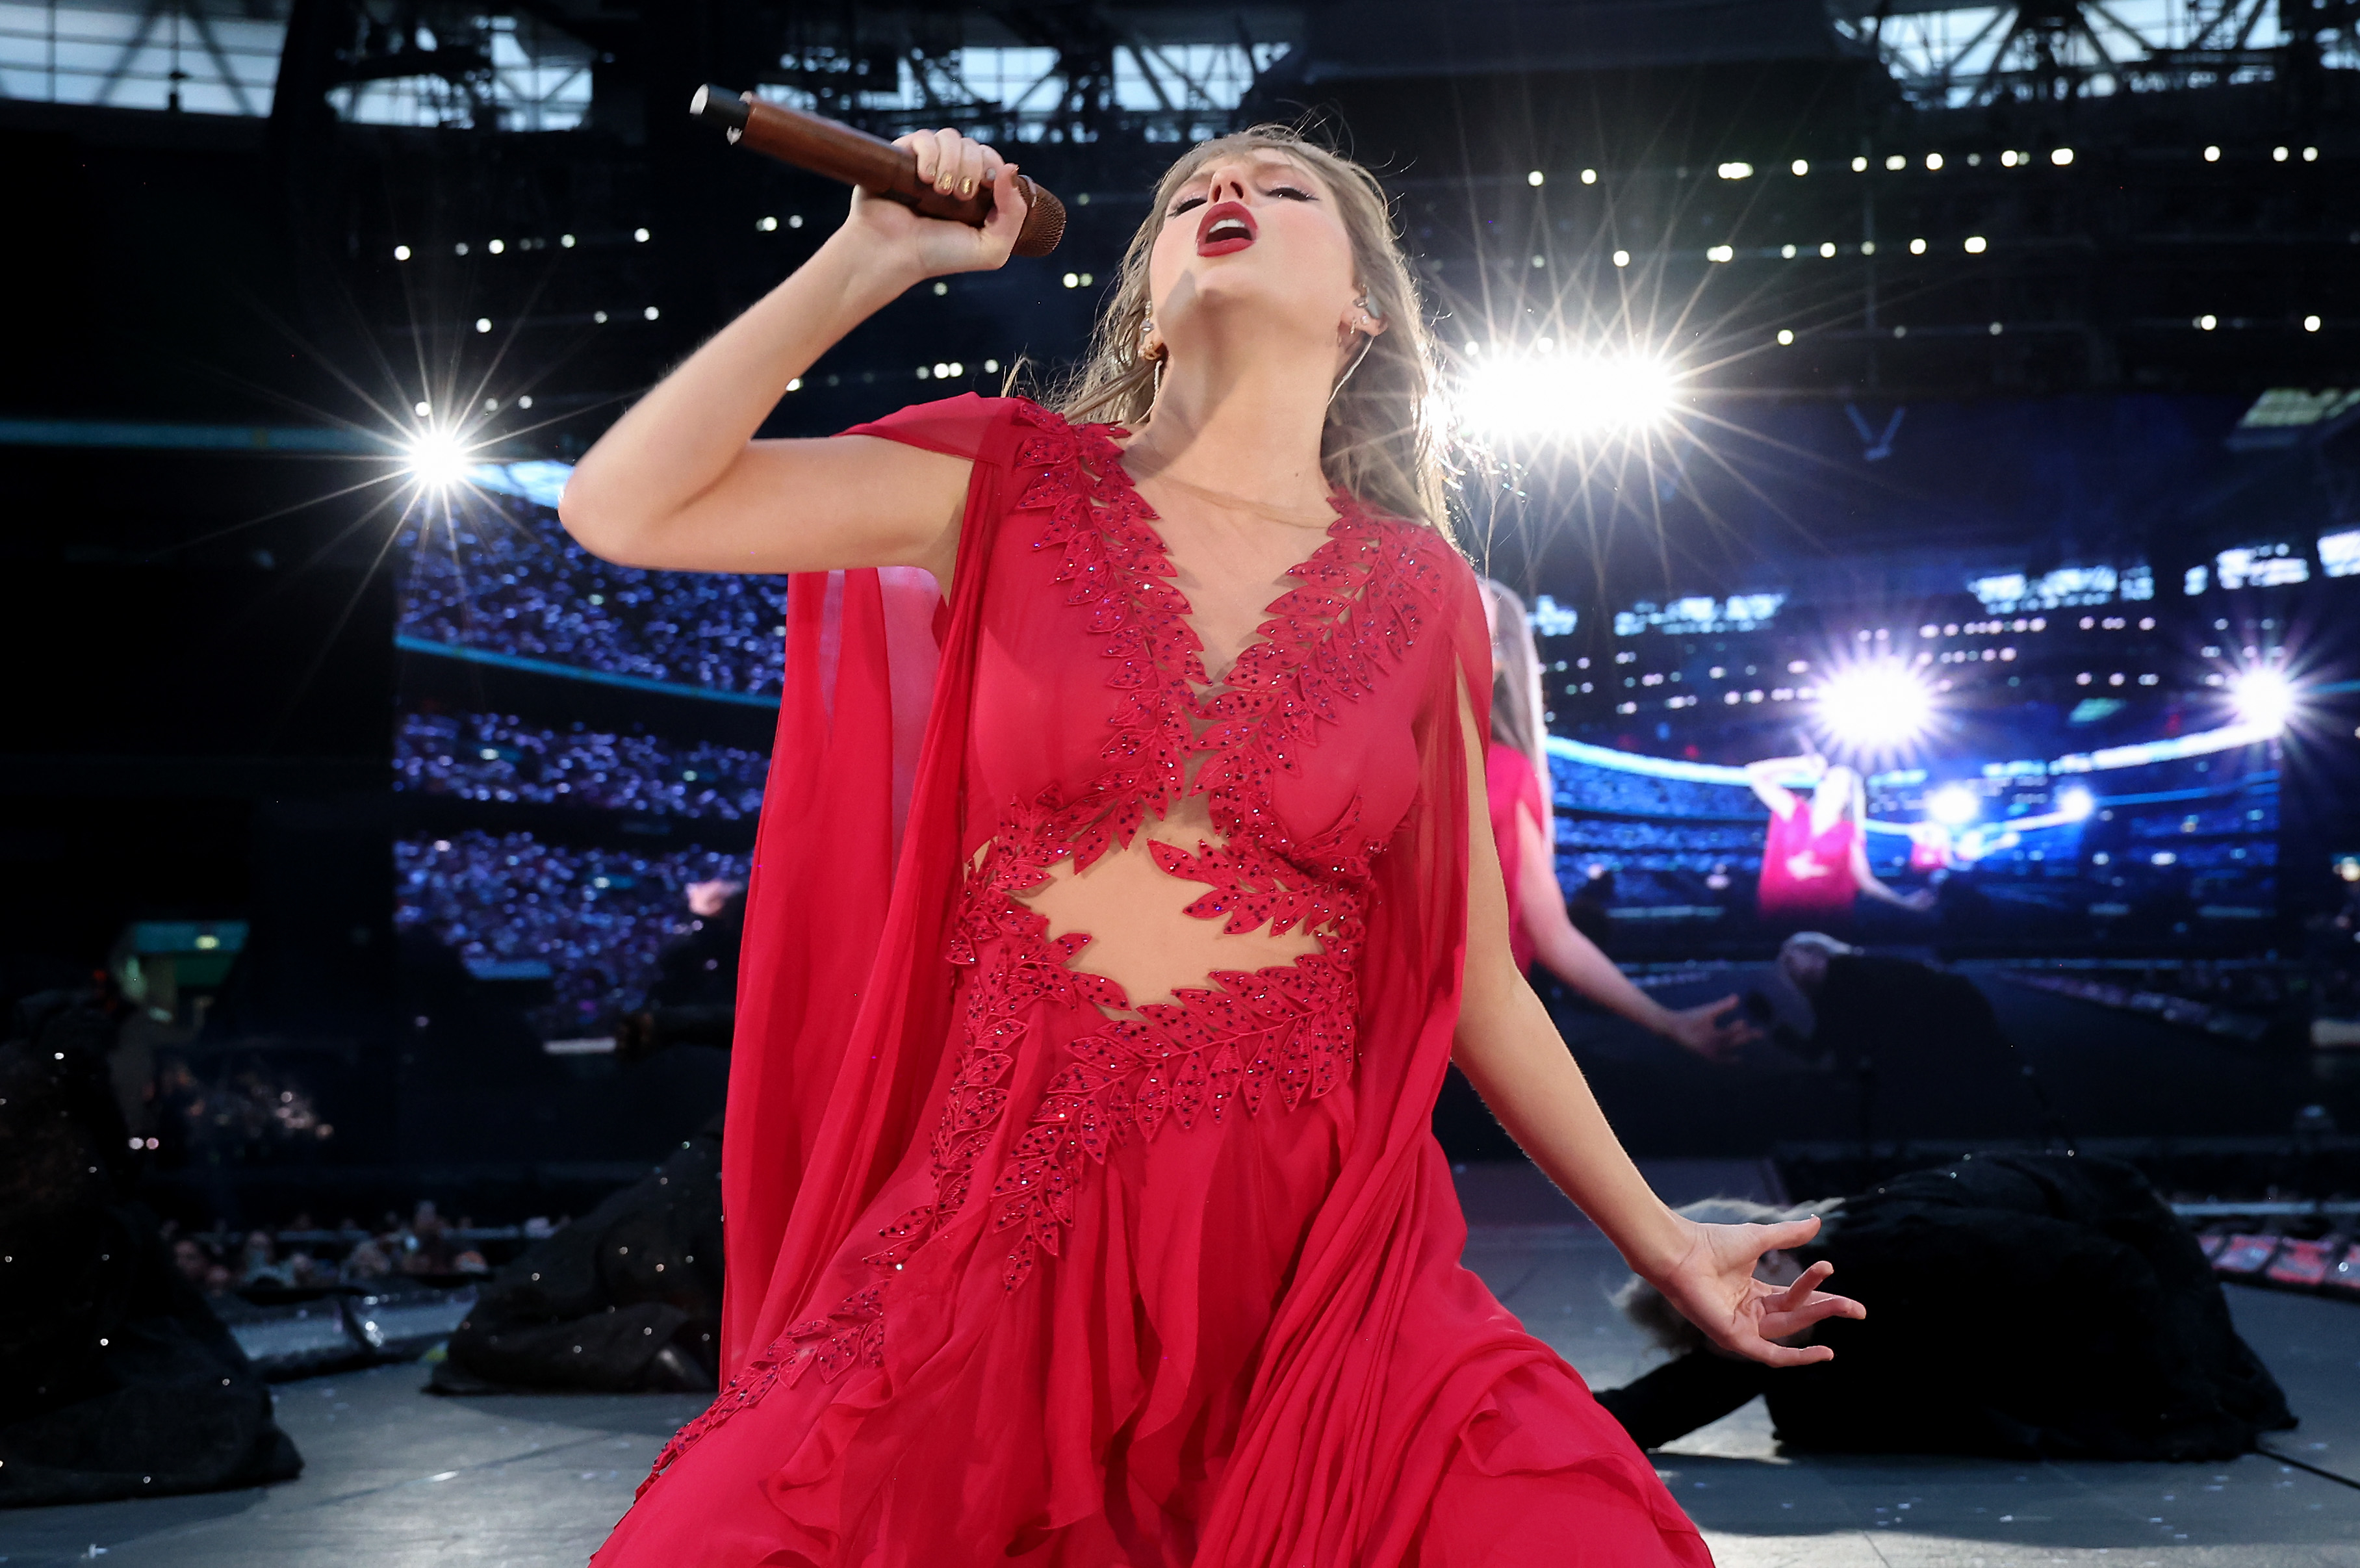 Taylor Swift performs passionately on stage, holding a microphone, wearing a flowing red dress with intricate detailing, against a backdrop of concert lights